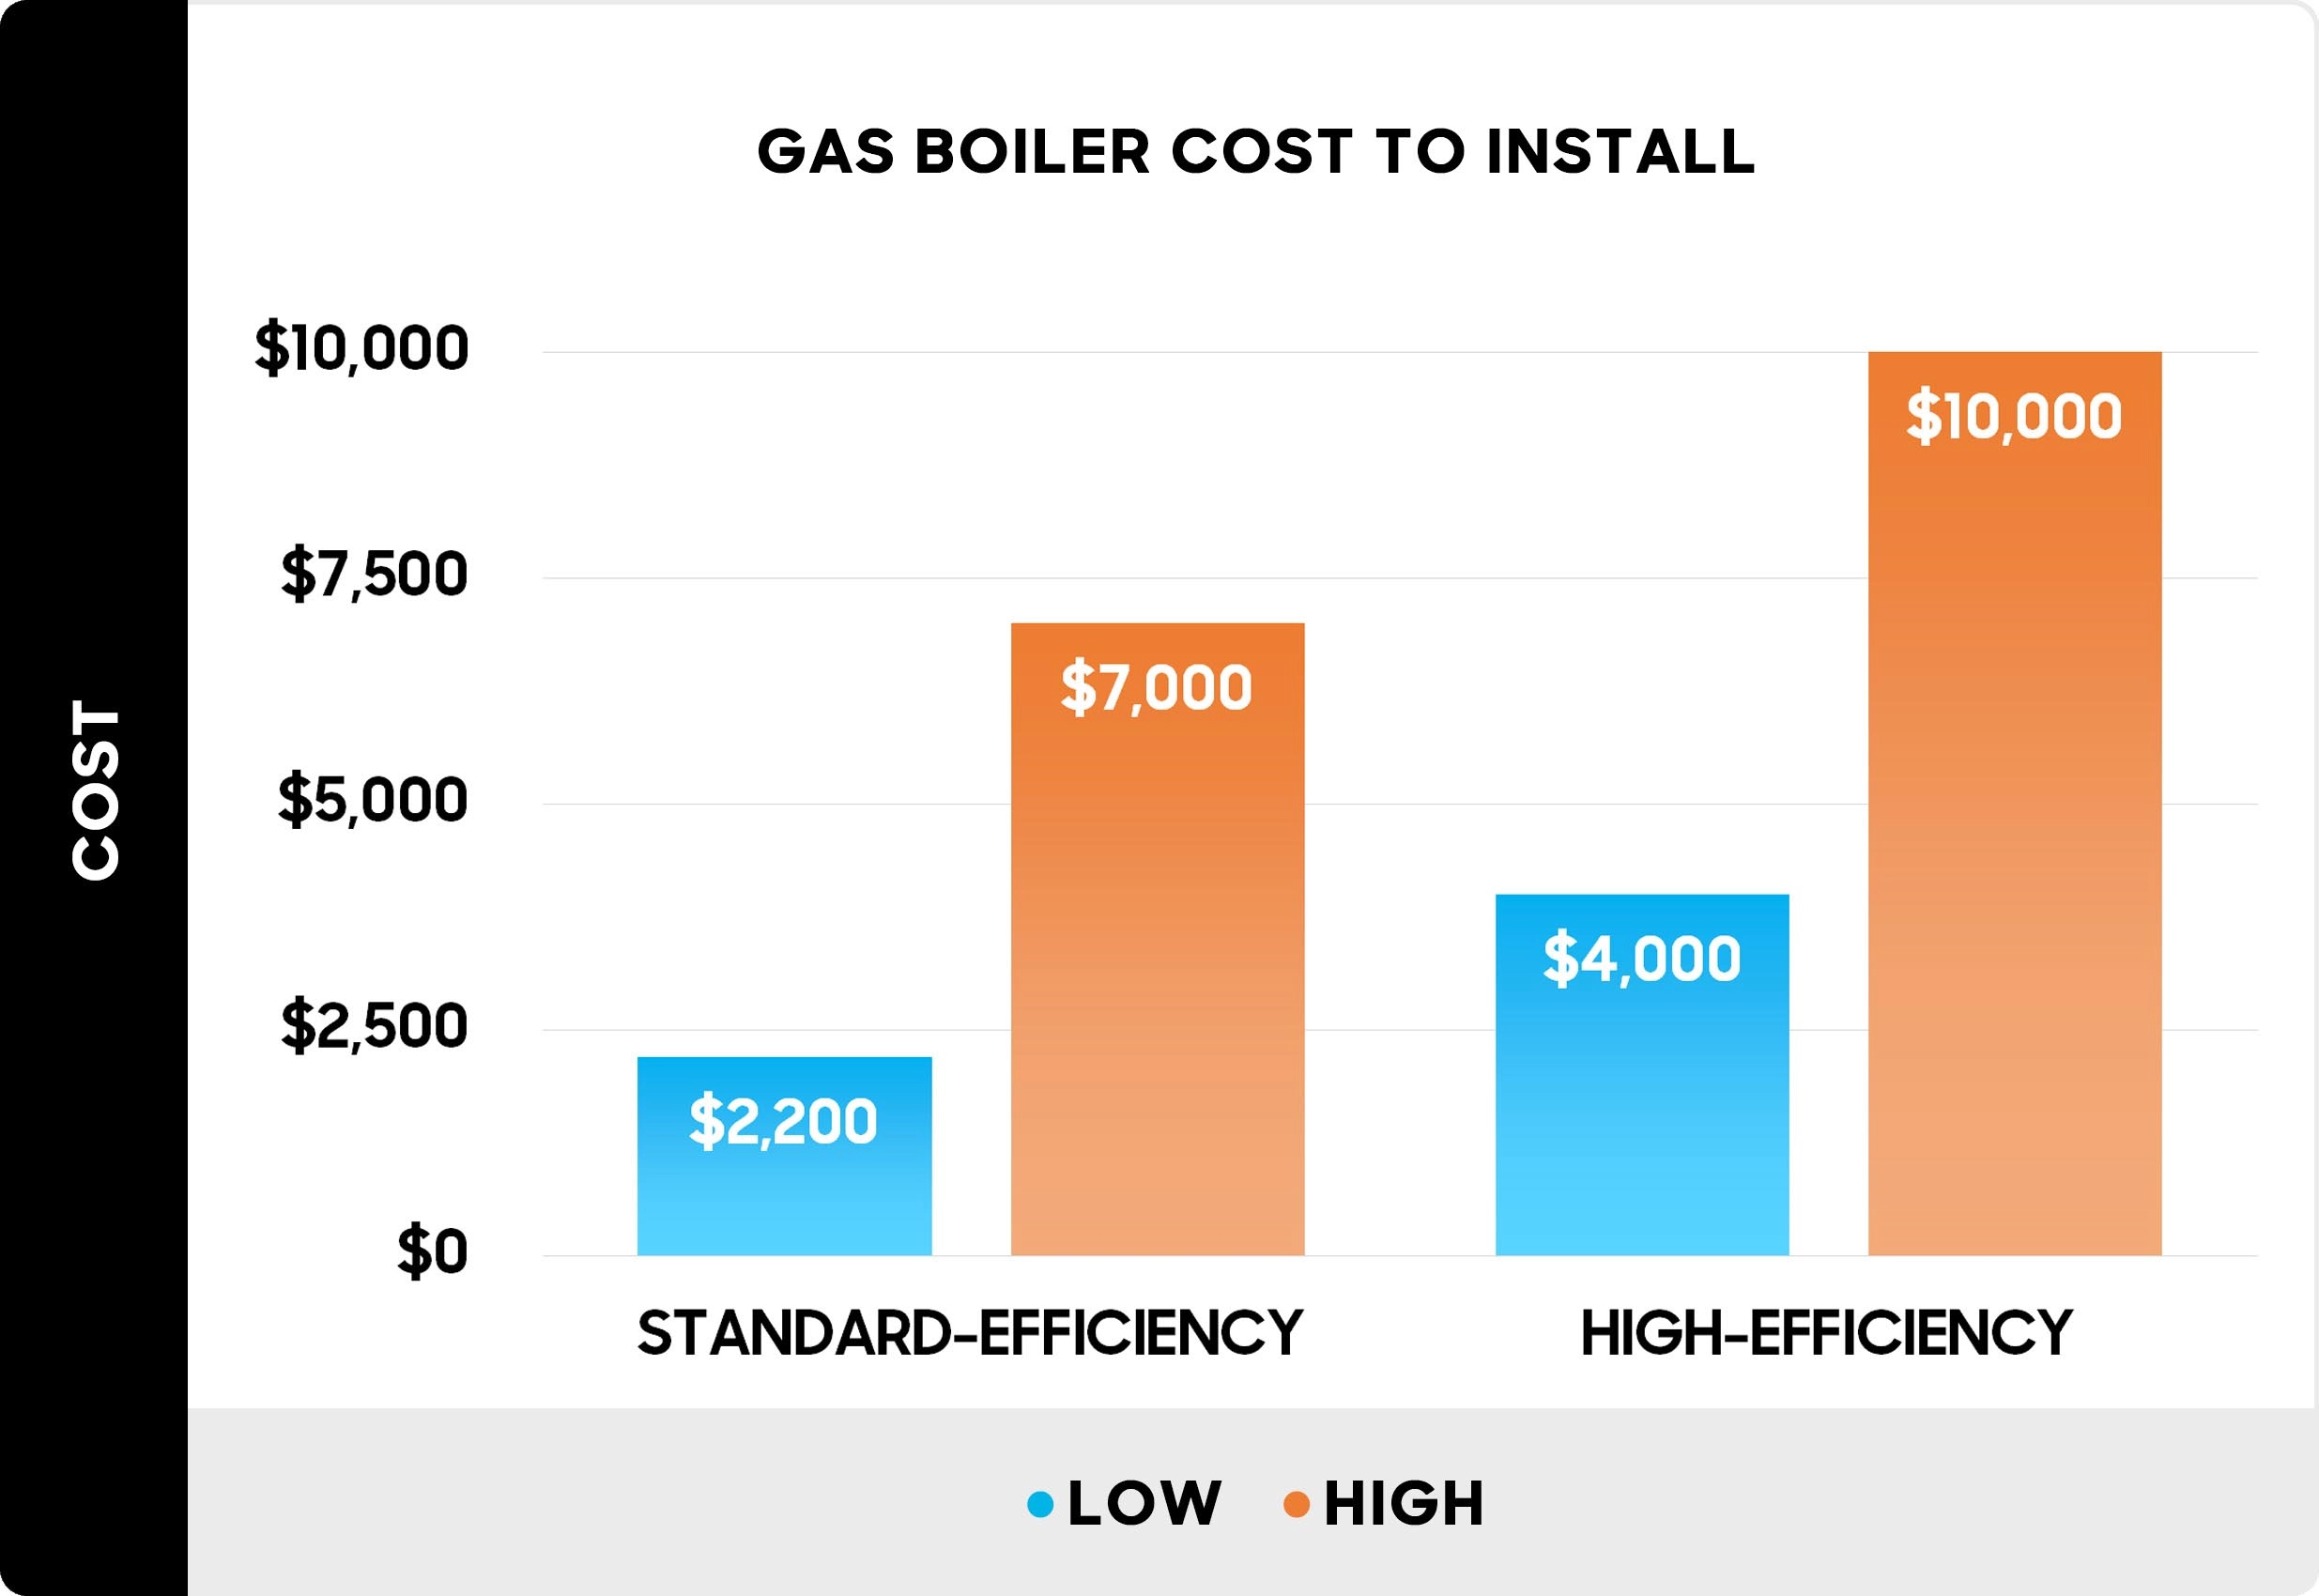 Gas boiler cost to install - chart